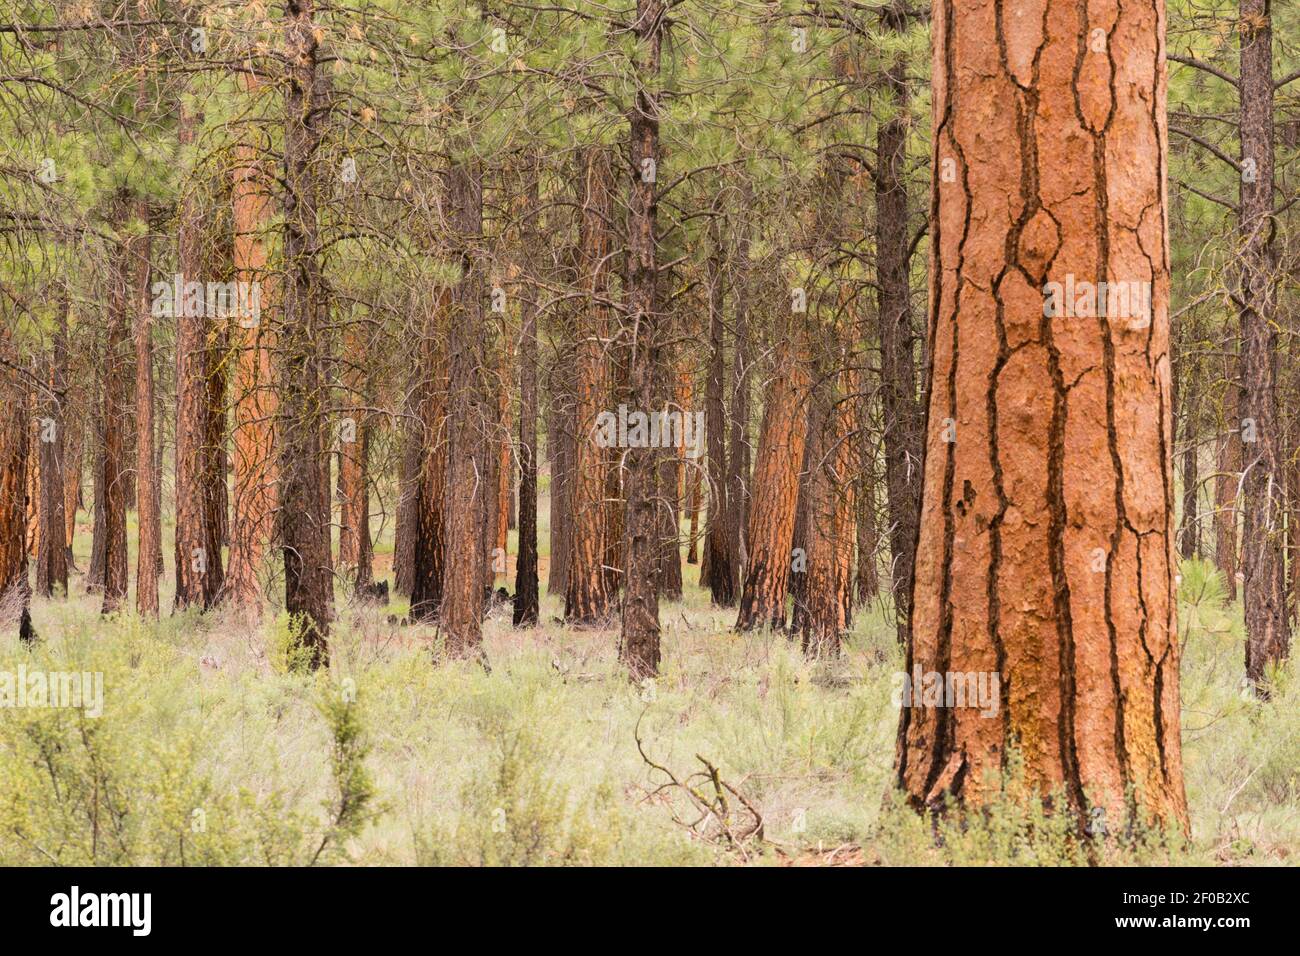 Beautiful Stand of Trees Bend Oregon Deschutes County Stock Photo